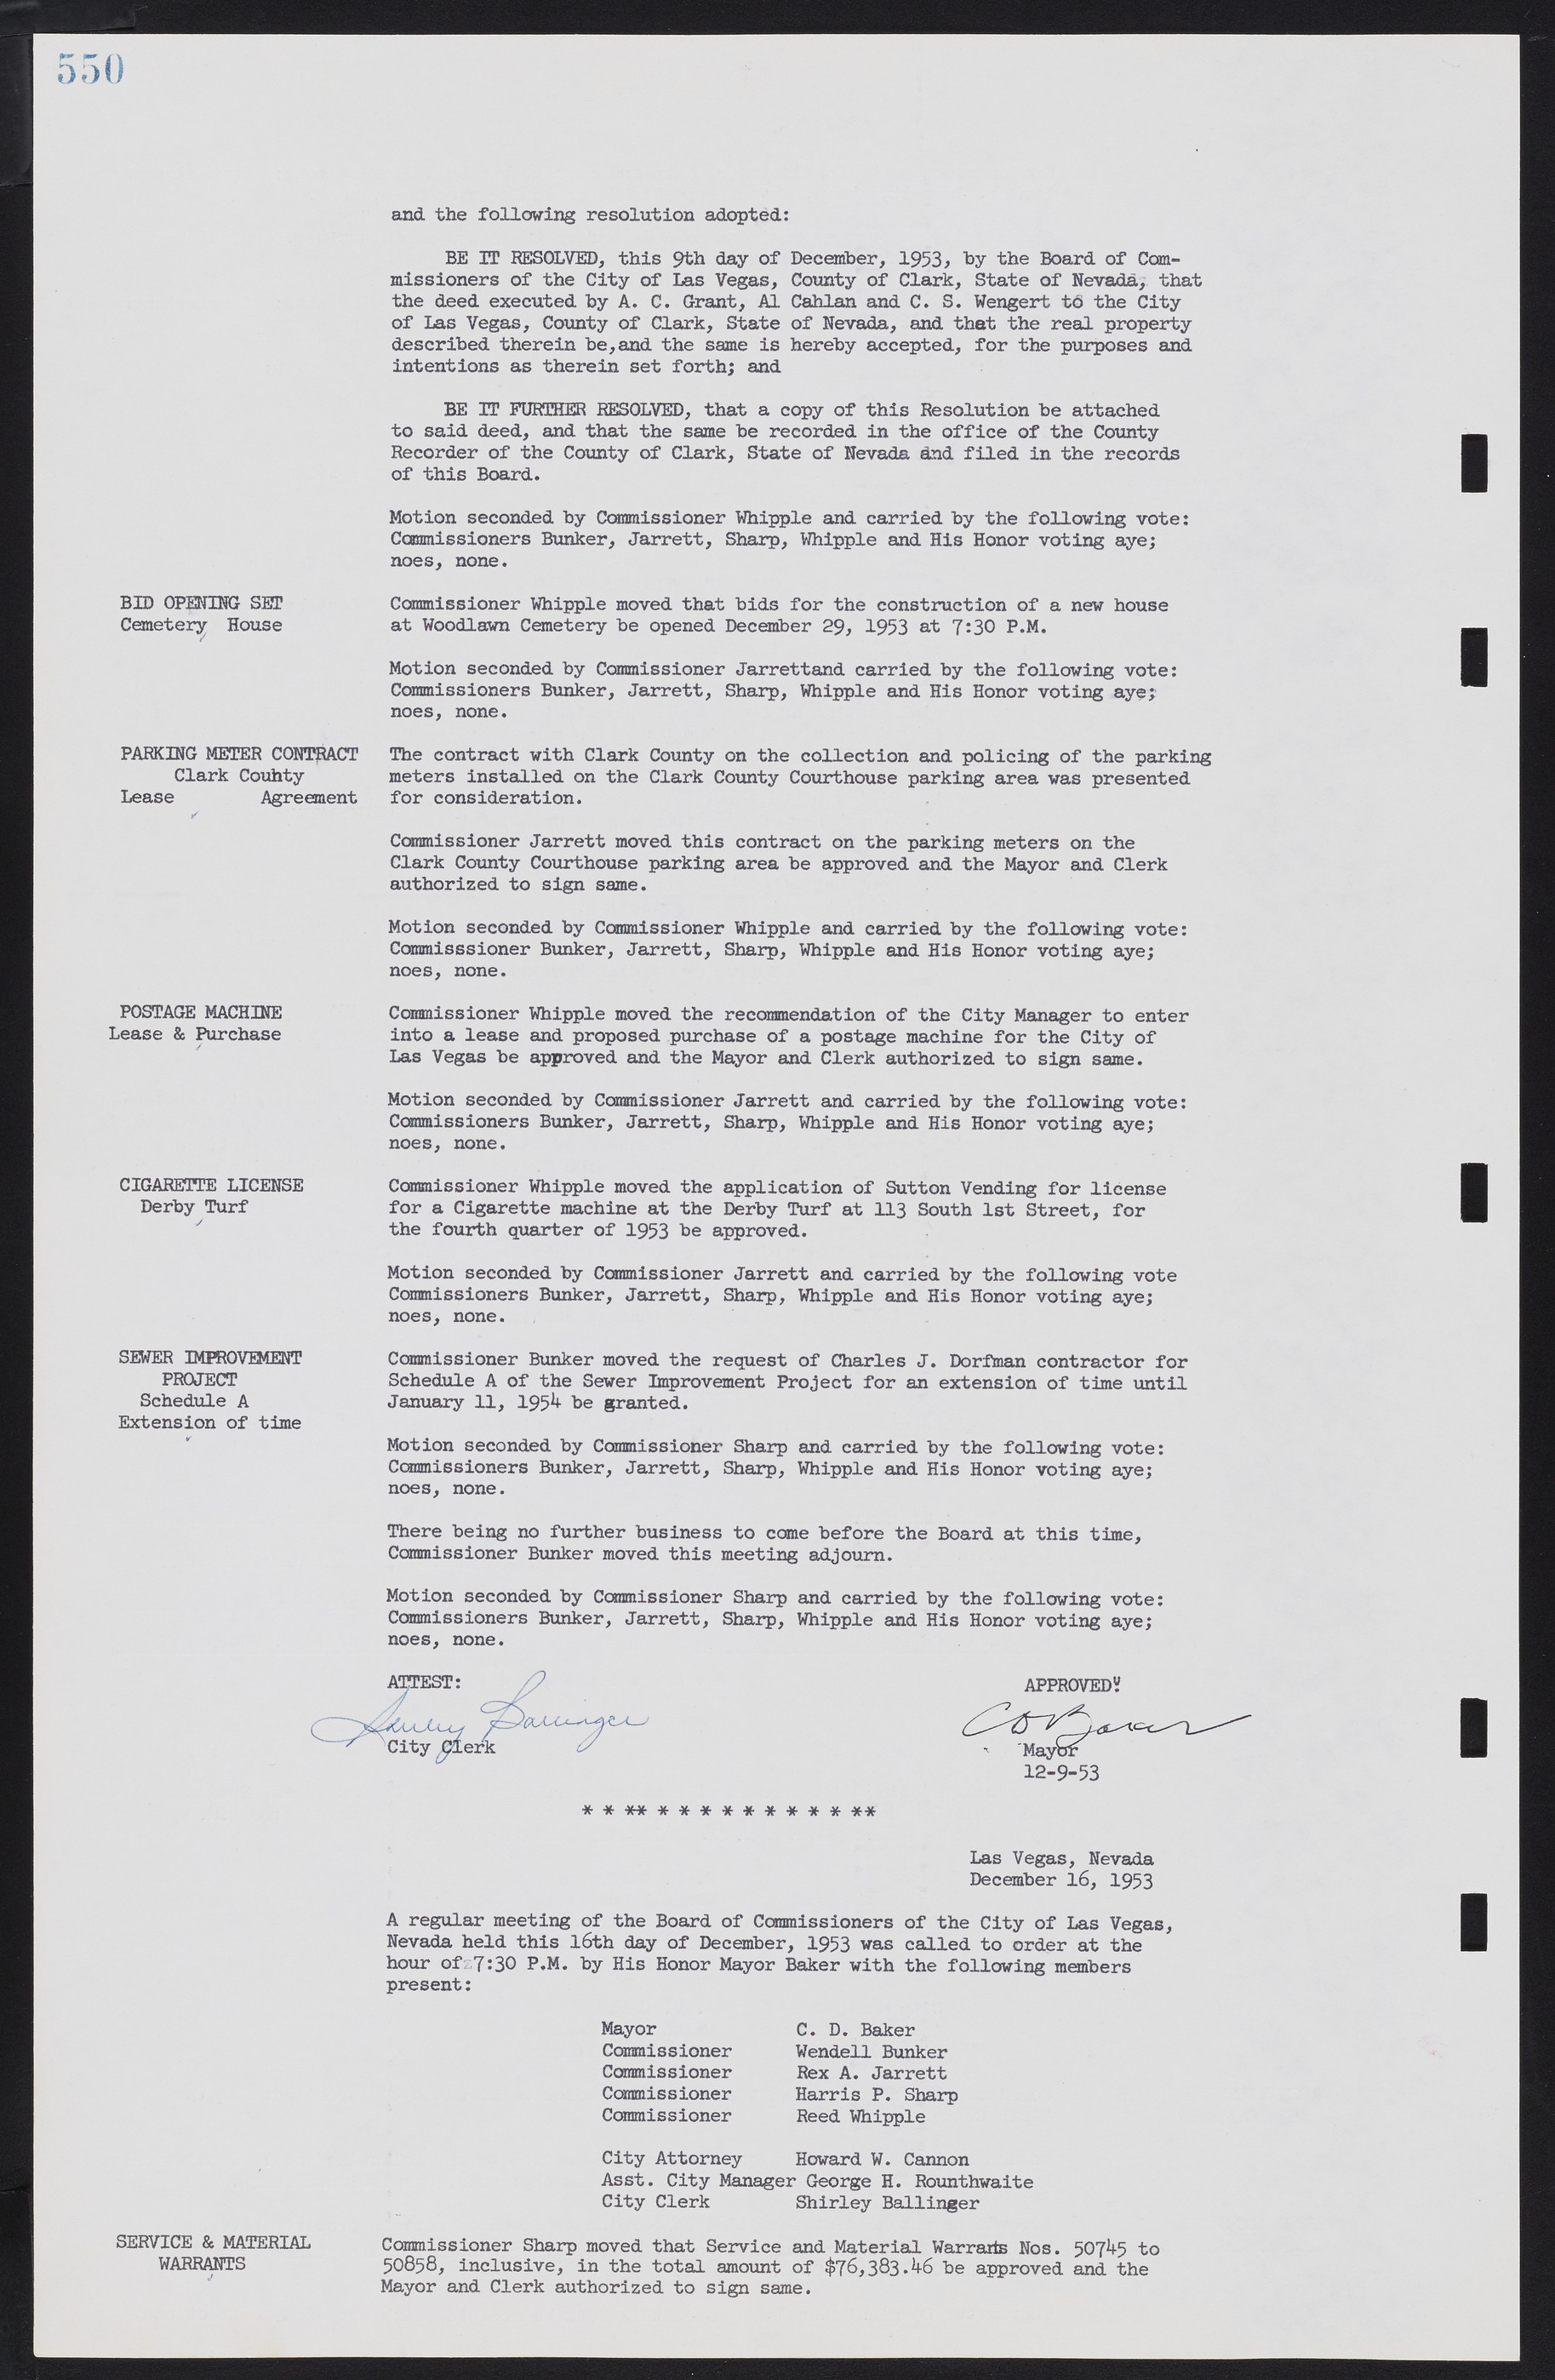 Las Vegas City Commission Minutes, May 26, 1952 to February 17, 1954, lvc000008-580